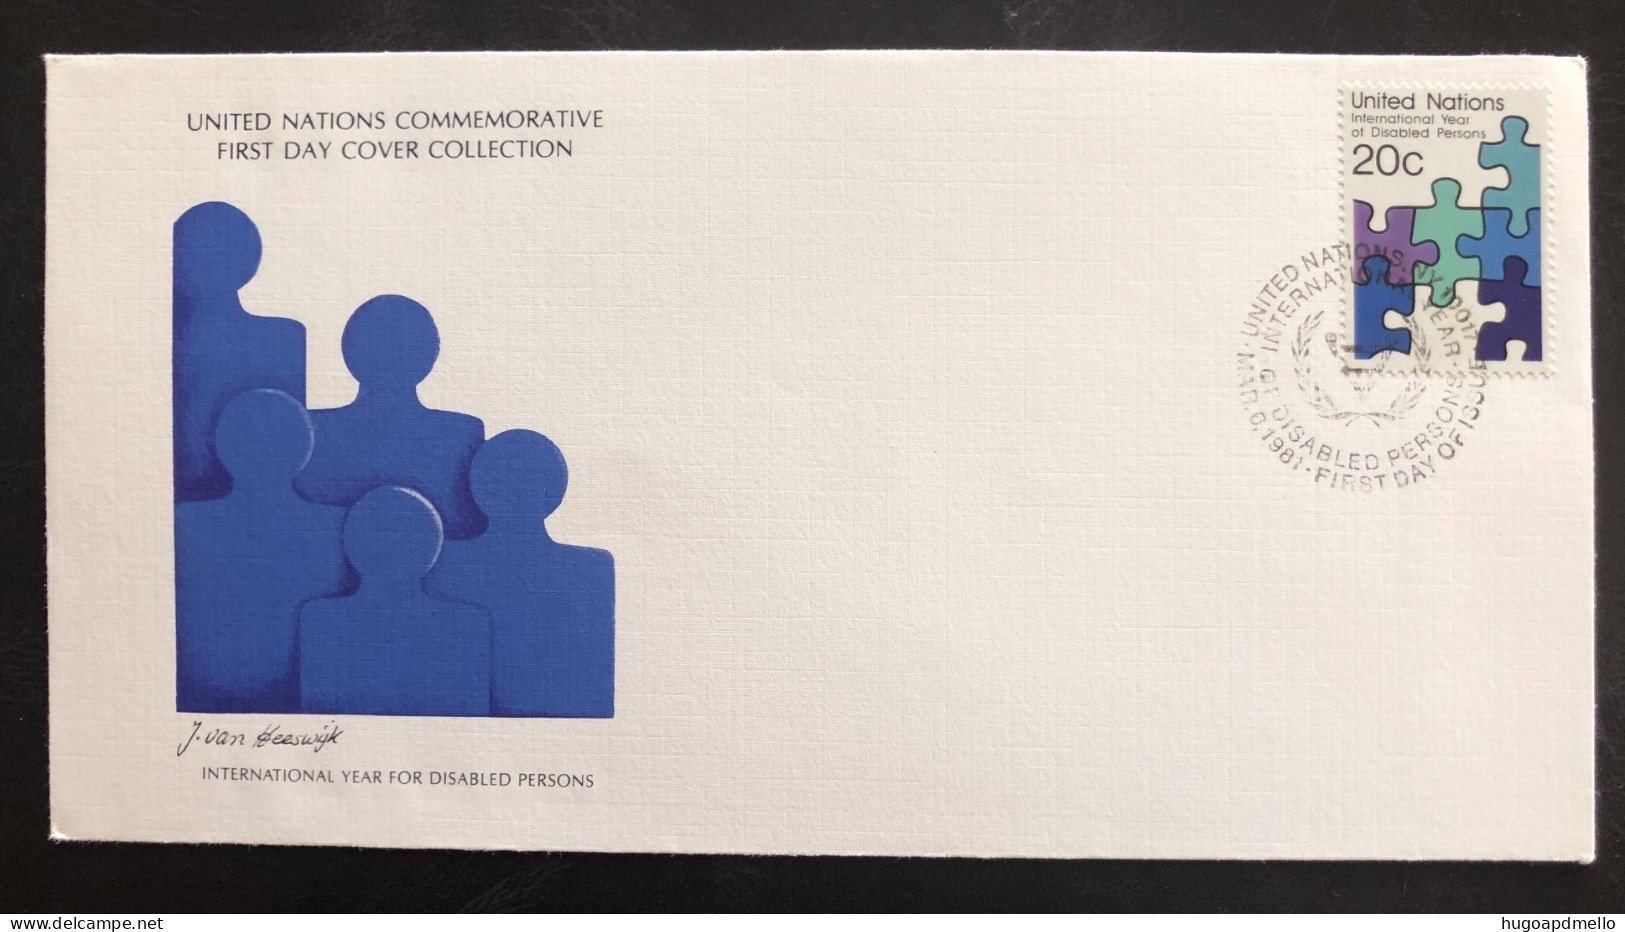 UNITED NATIONS, Uncirculated FDC « INTERNATIONAL YEAR FOR DISABLED PERSONS », 1981 - UNO